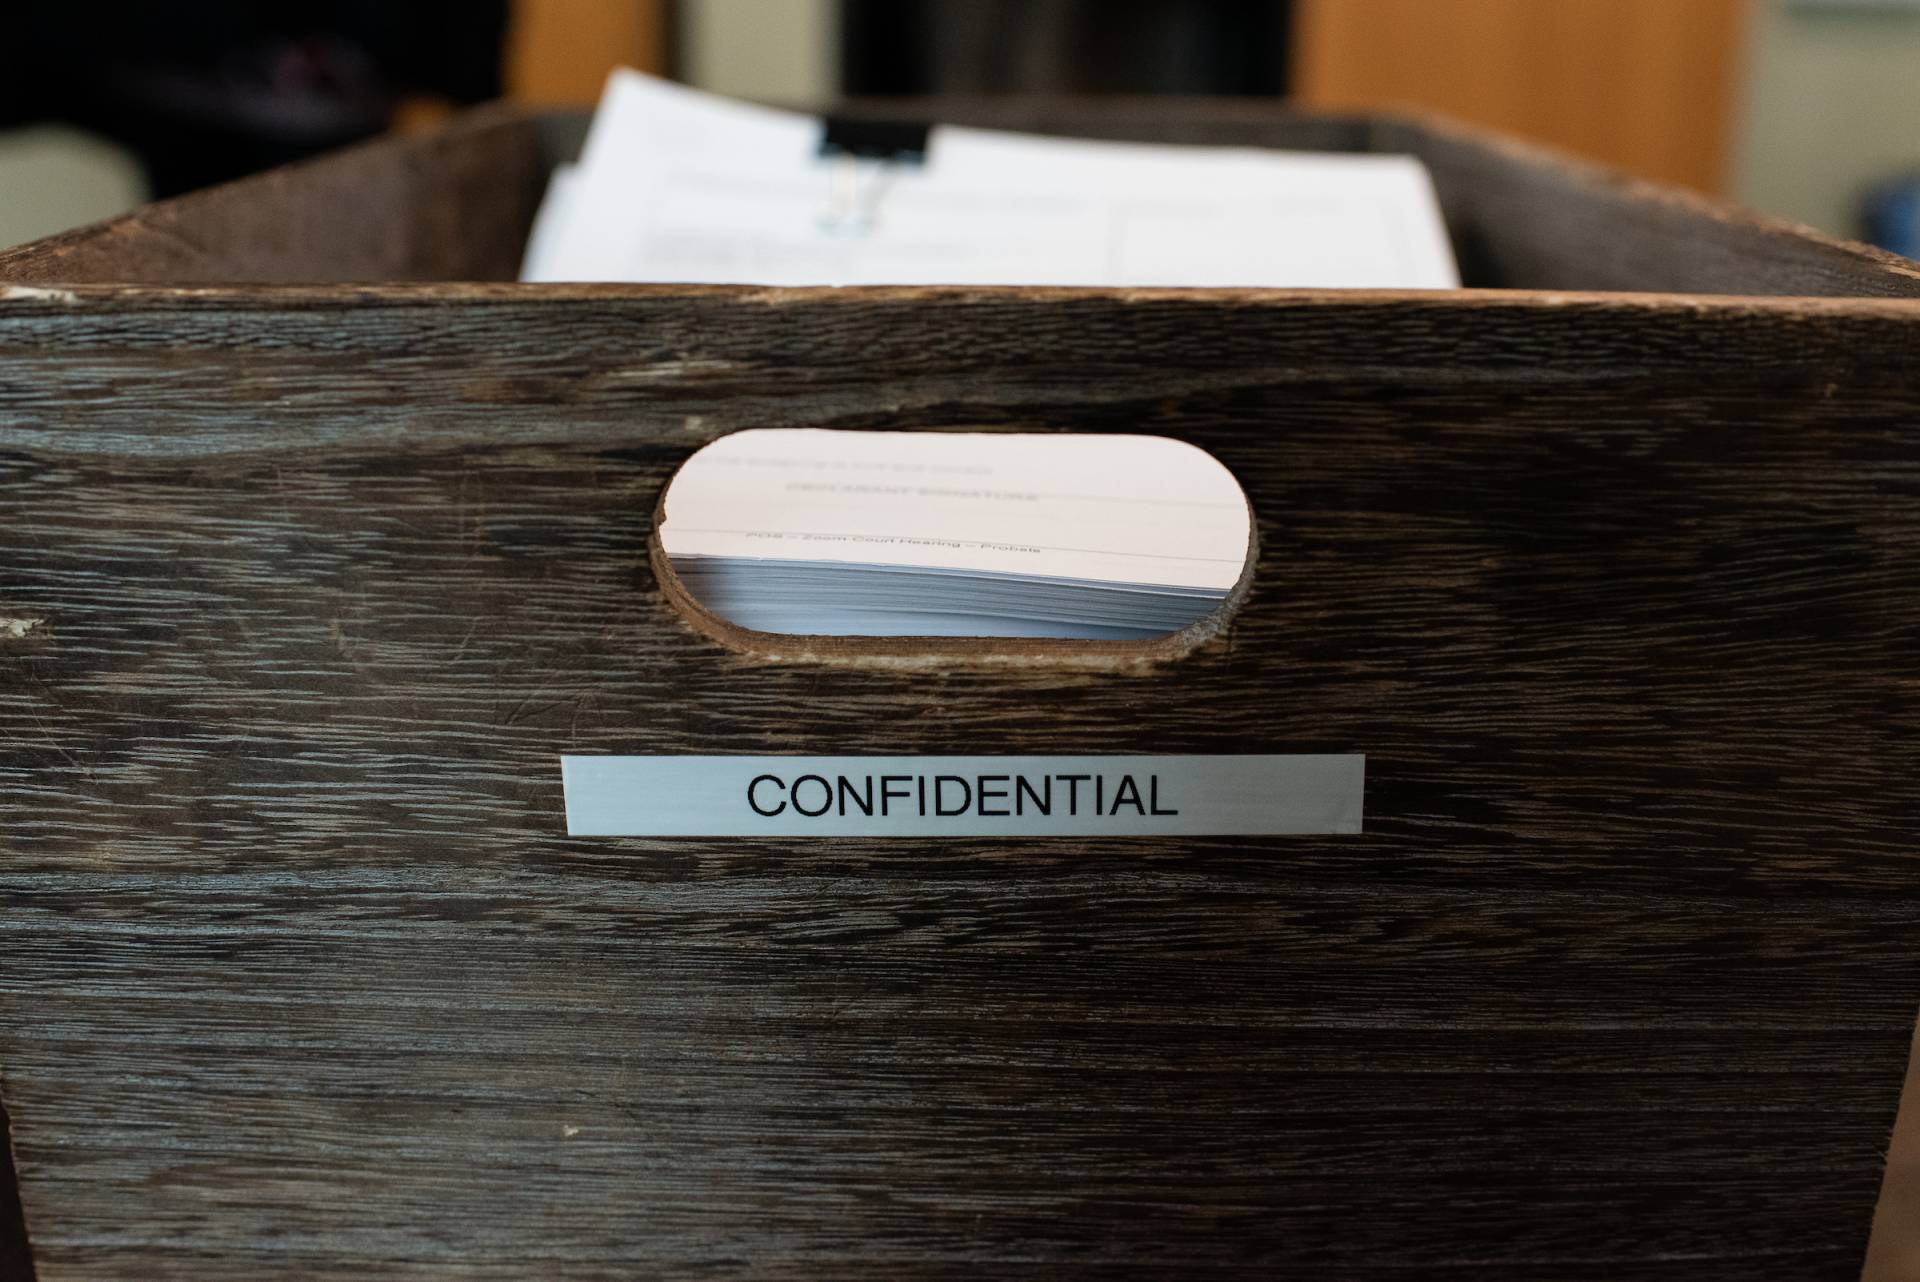 A box of papers that says "Confidential."